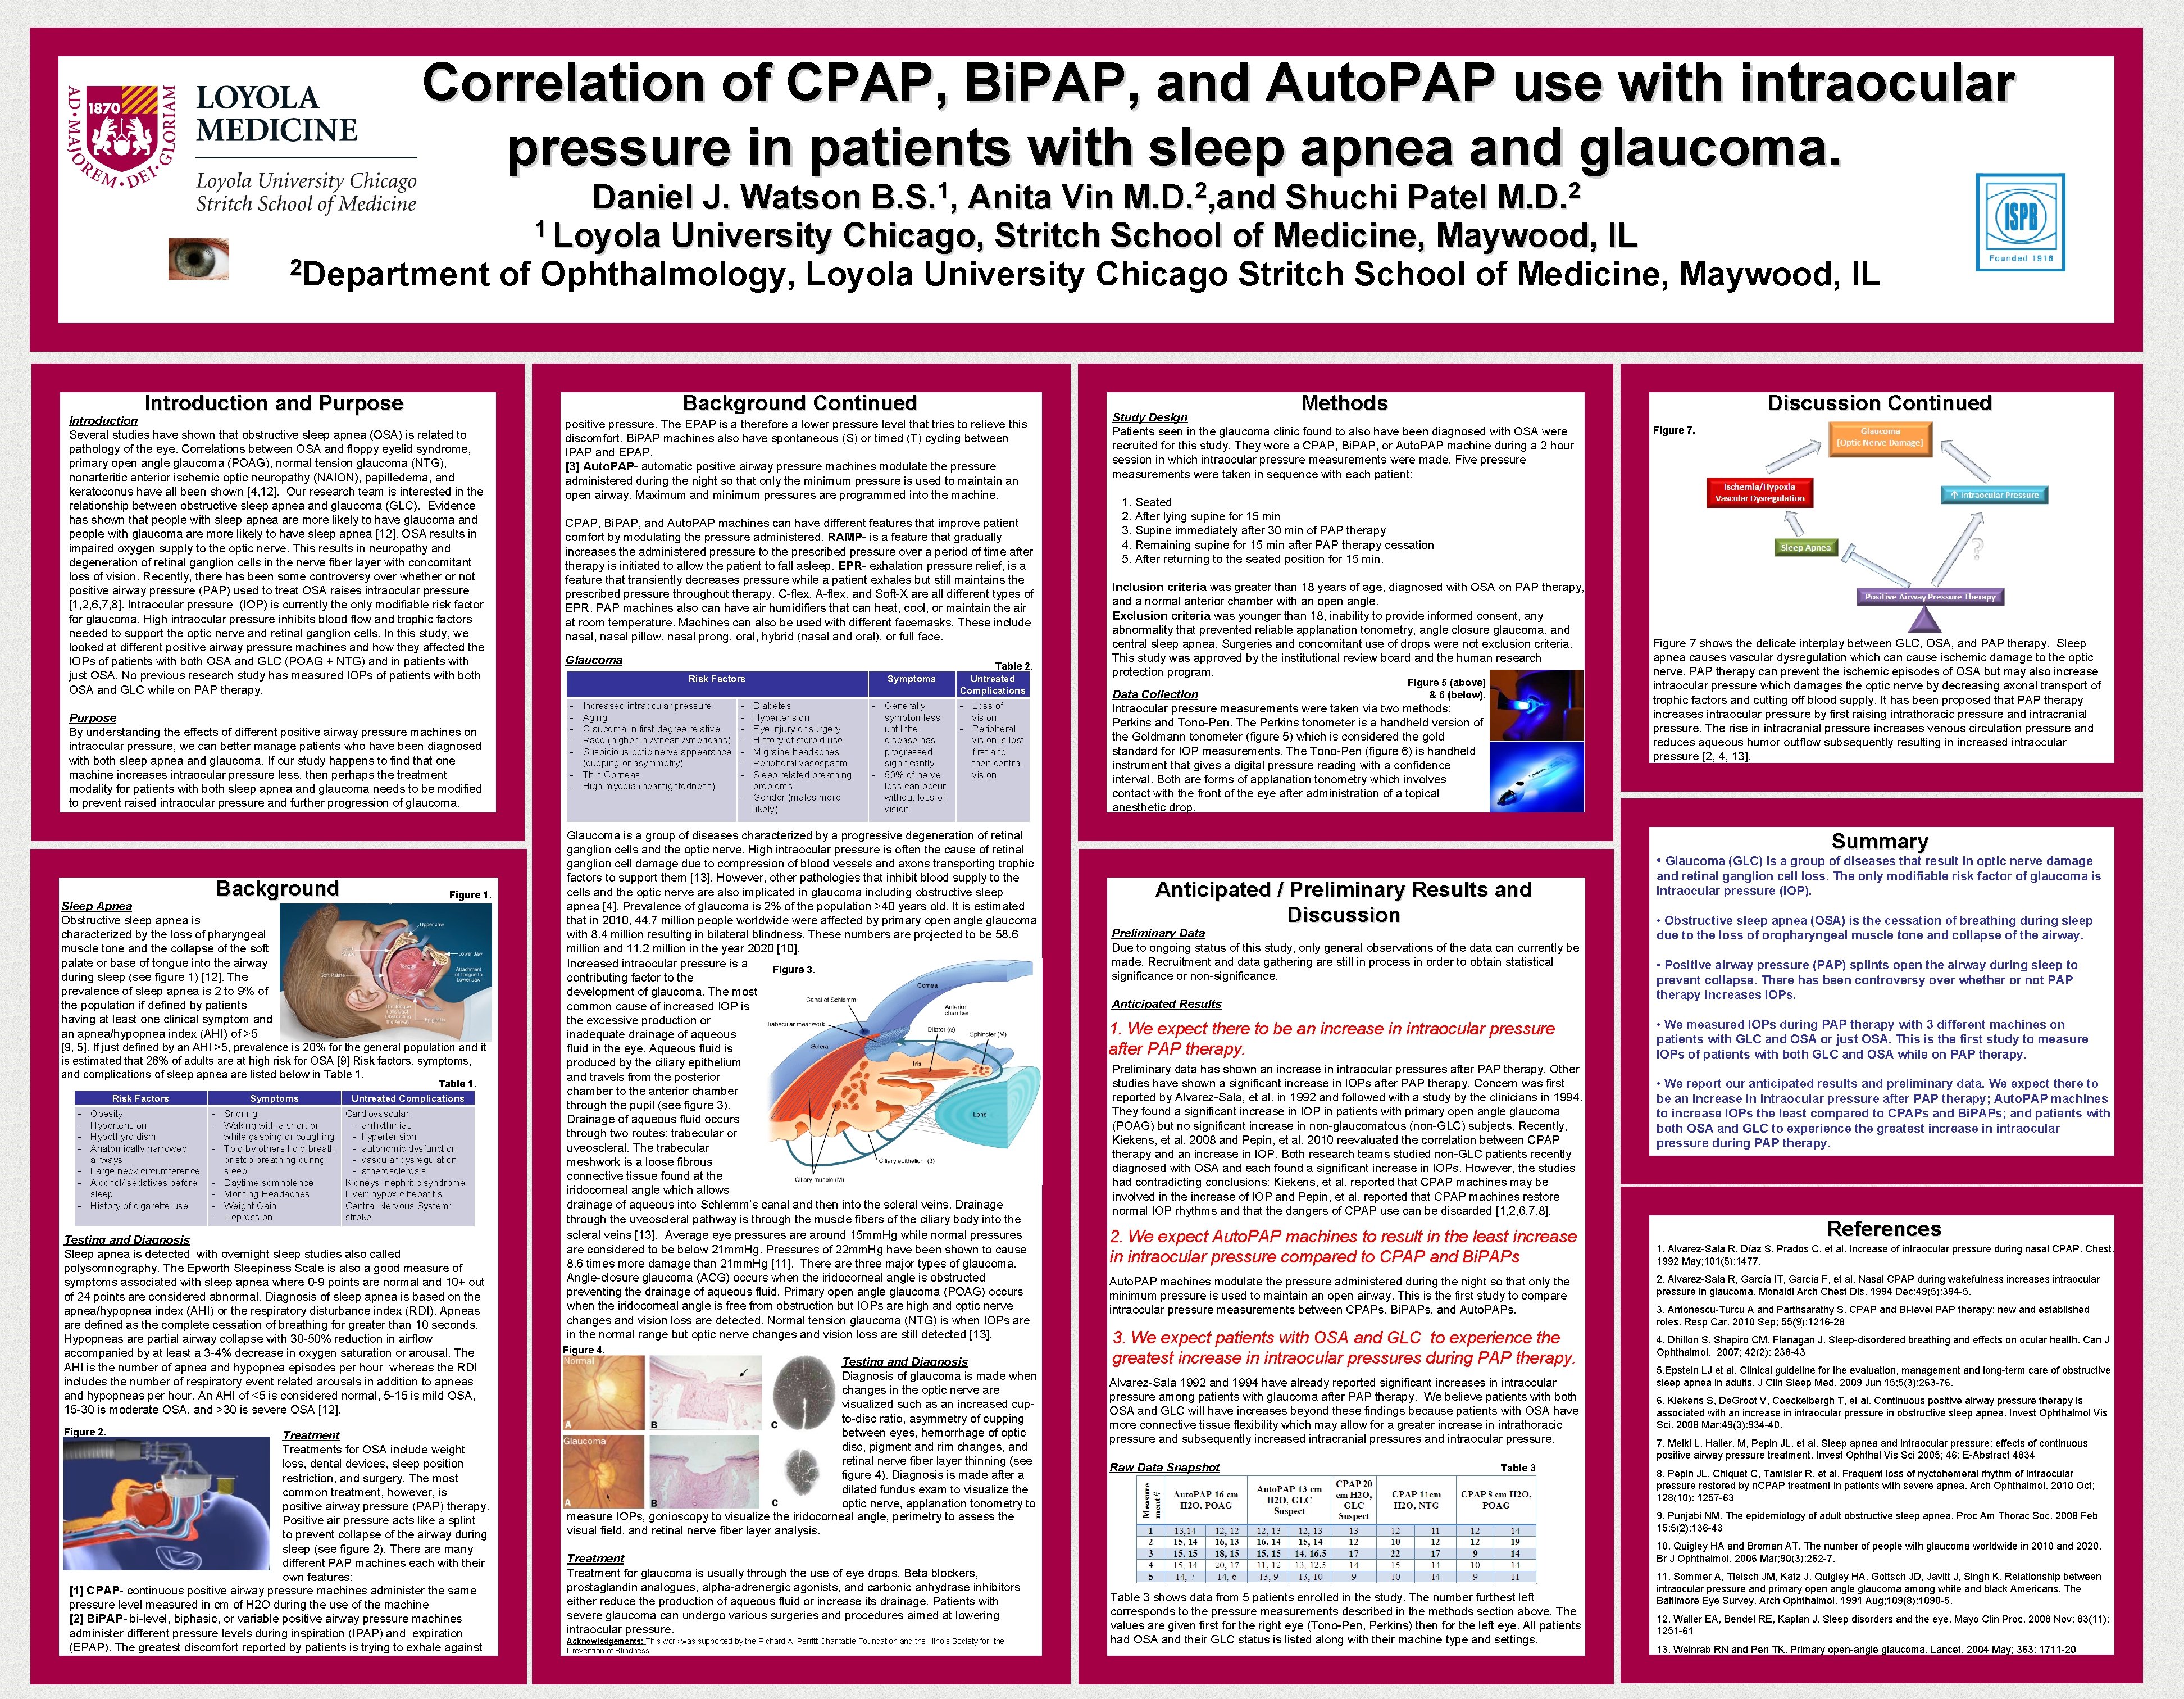 Correlation of CPAP, Bi. PAP, and Auto. PAP use with intraocular pressure in patients